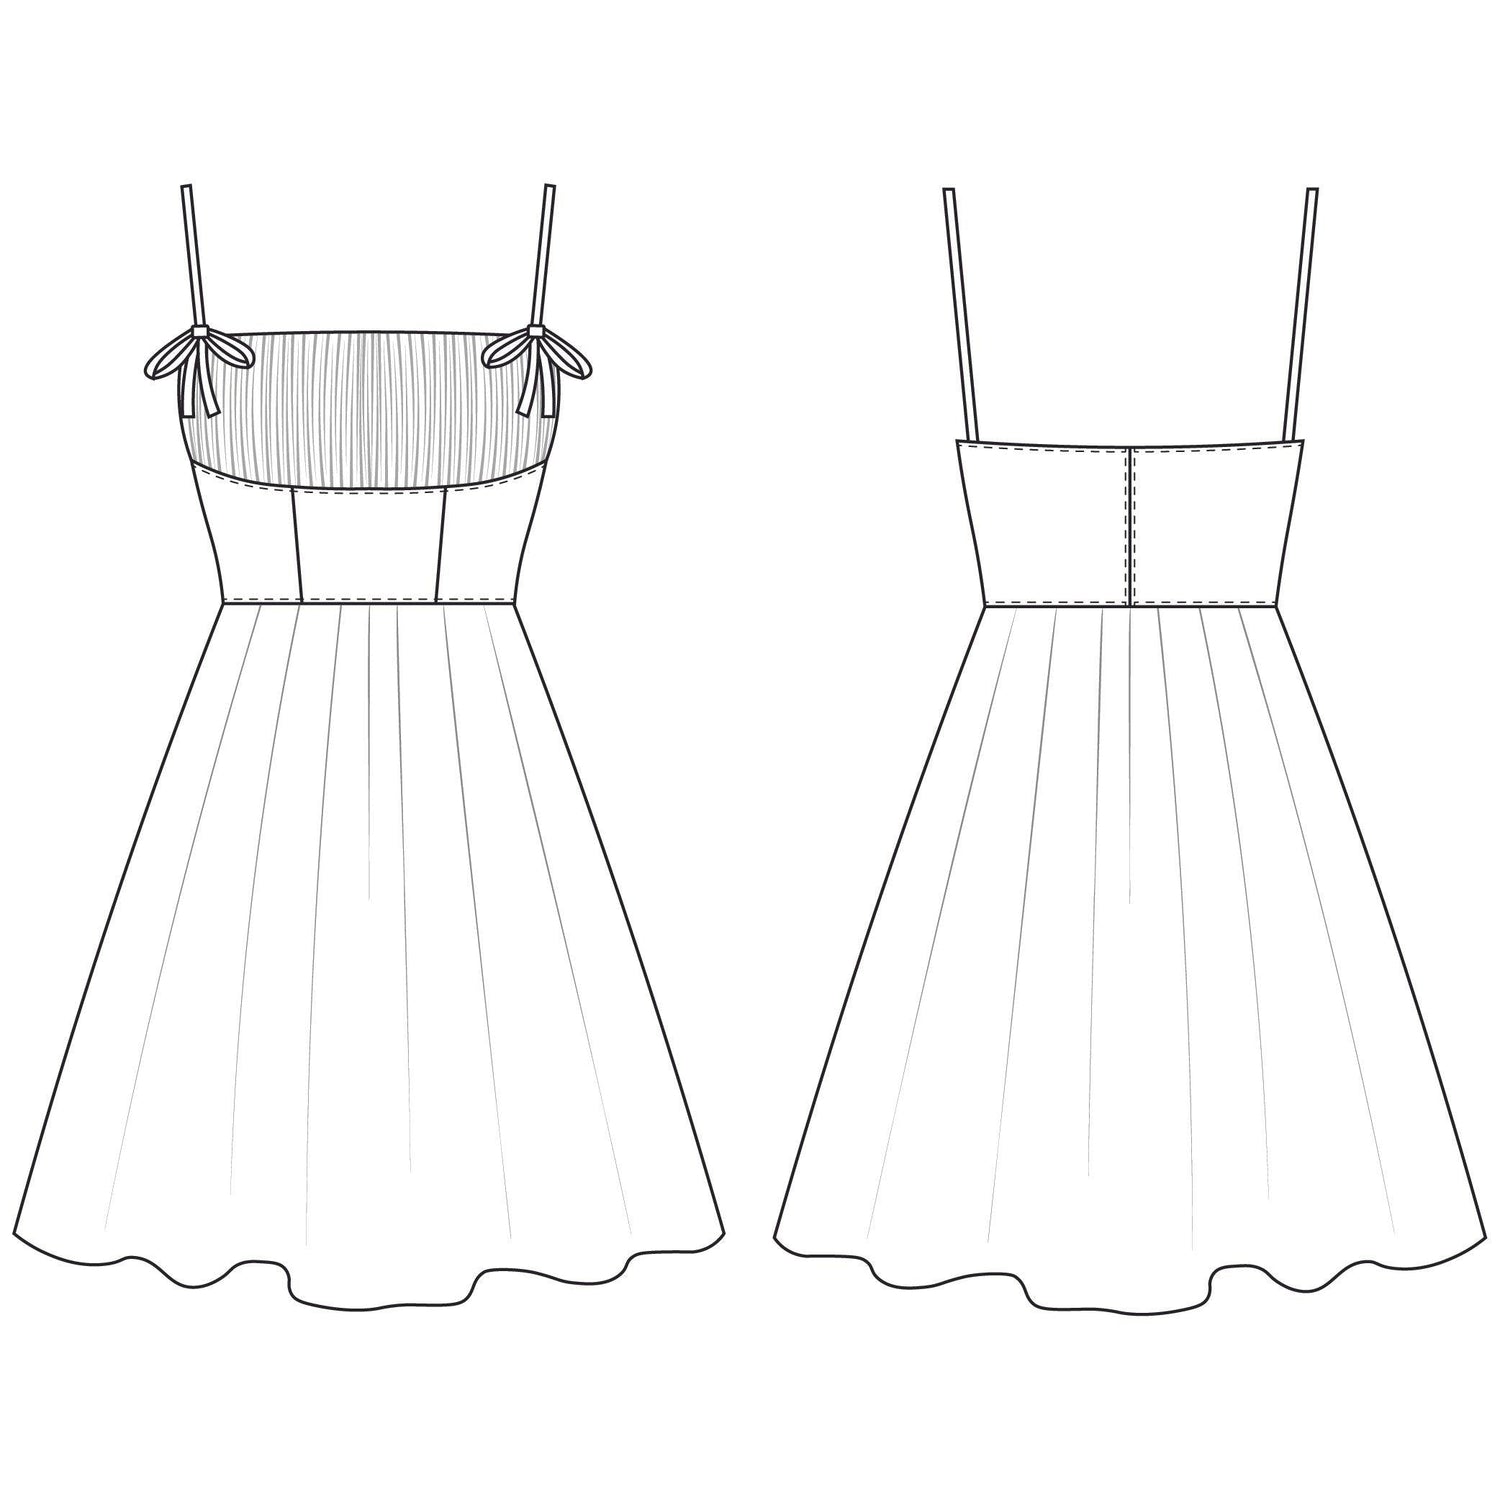 Back illustration of the Marilyn dress sewing pattern A9007